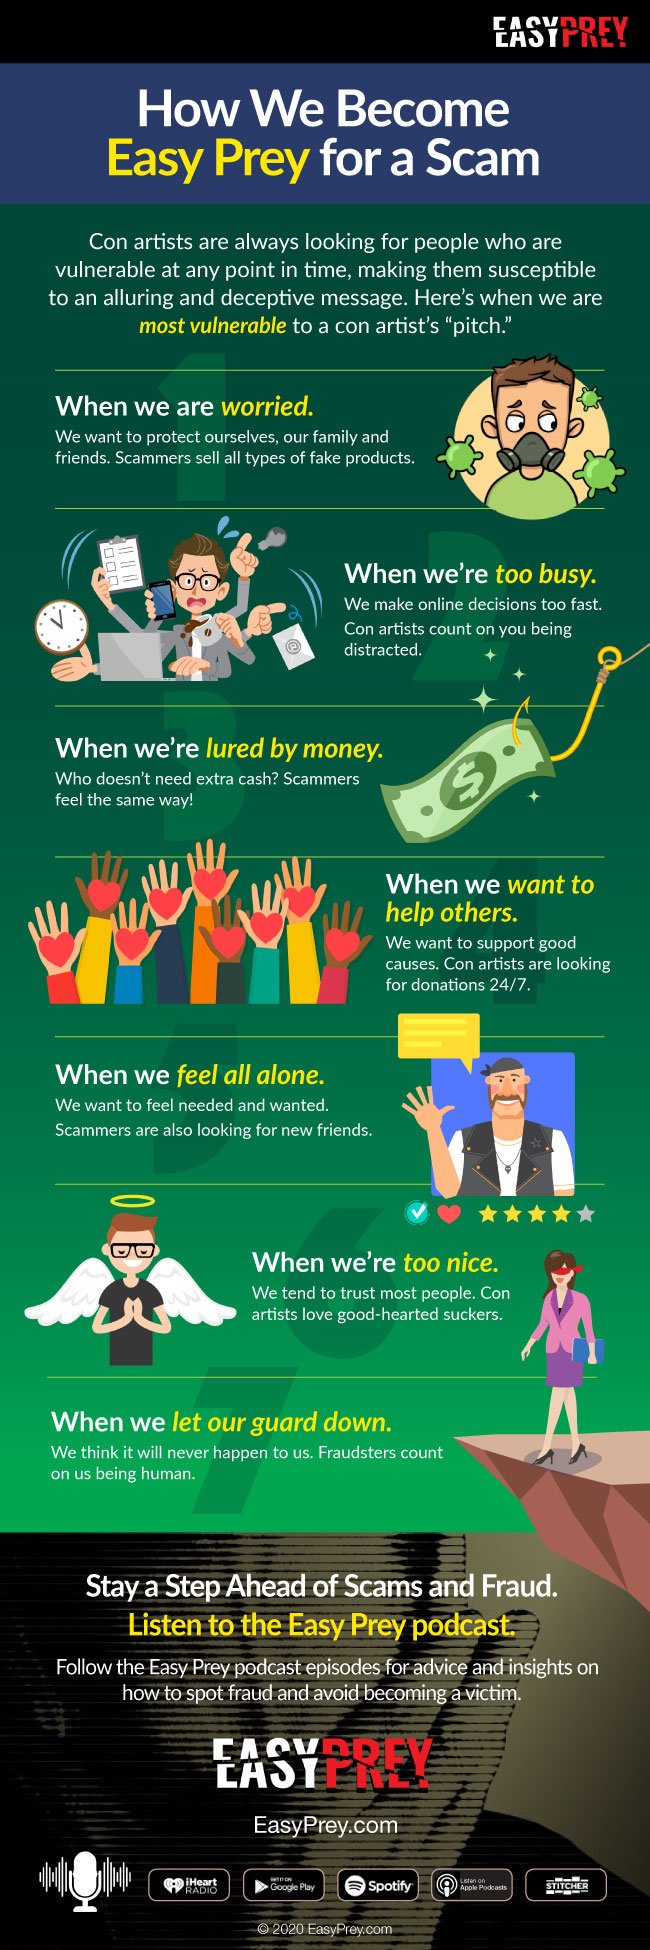 How We Become Easy Prey for a Scam Infographic